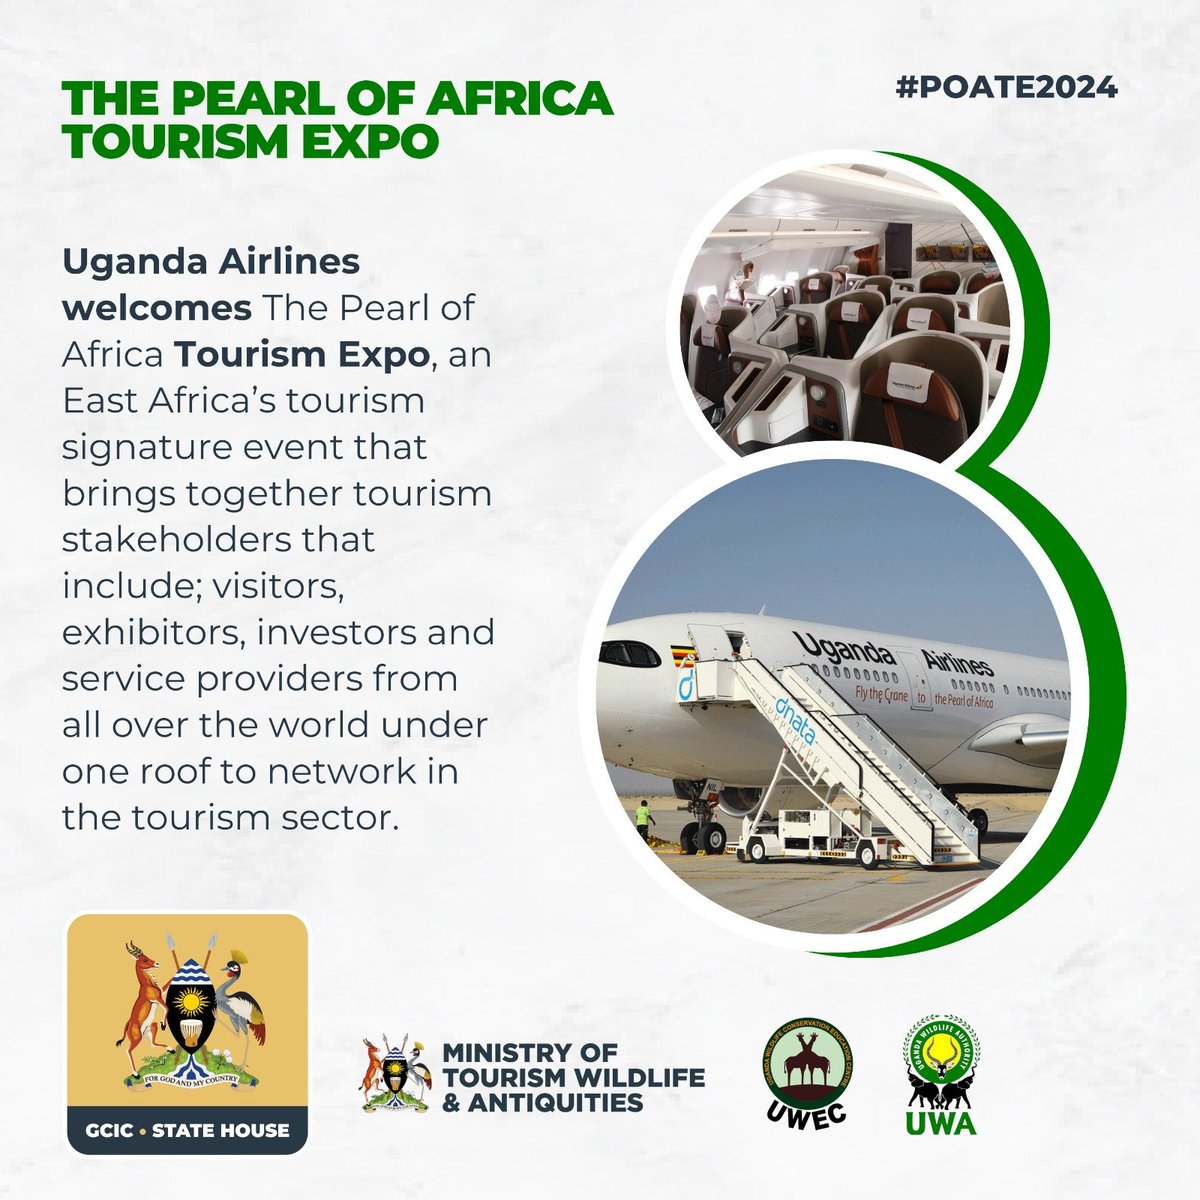 The Pearl of Africa Tourism Expo 2024 will bring together tourism and travel trade partners from Uganda and all over the world to meet new clients #POATE2024 @spekeresort @TourismBoardUg 23rd-25th May 2024. @MTWAUganda @ugwildlife @UWEC_EntebbeZoo